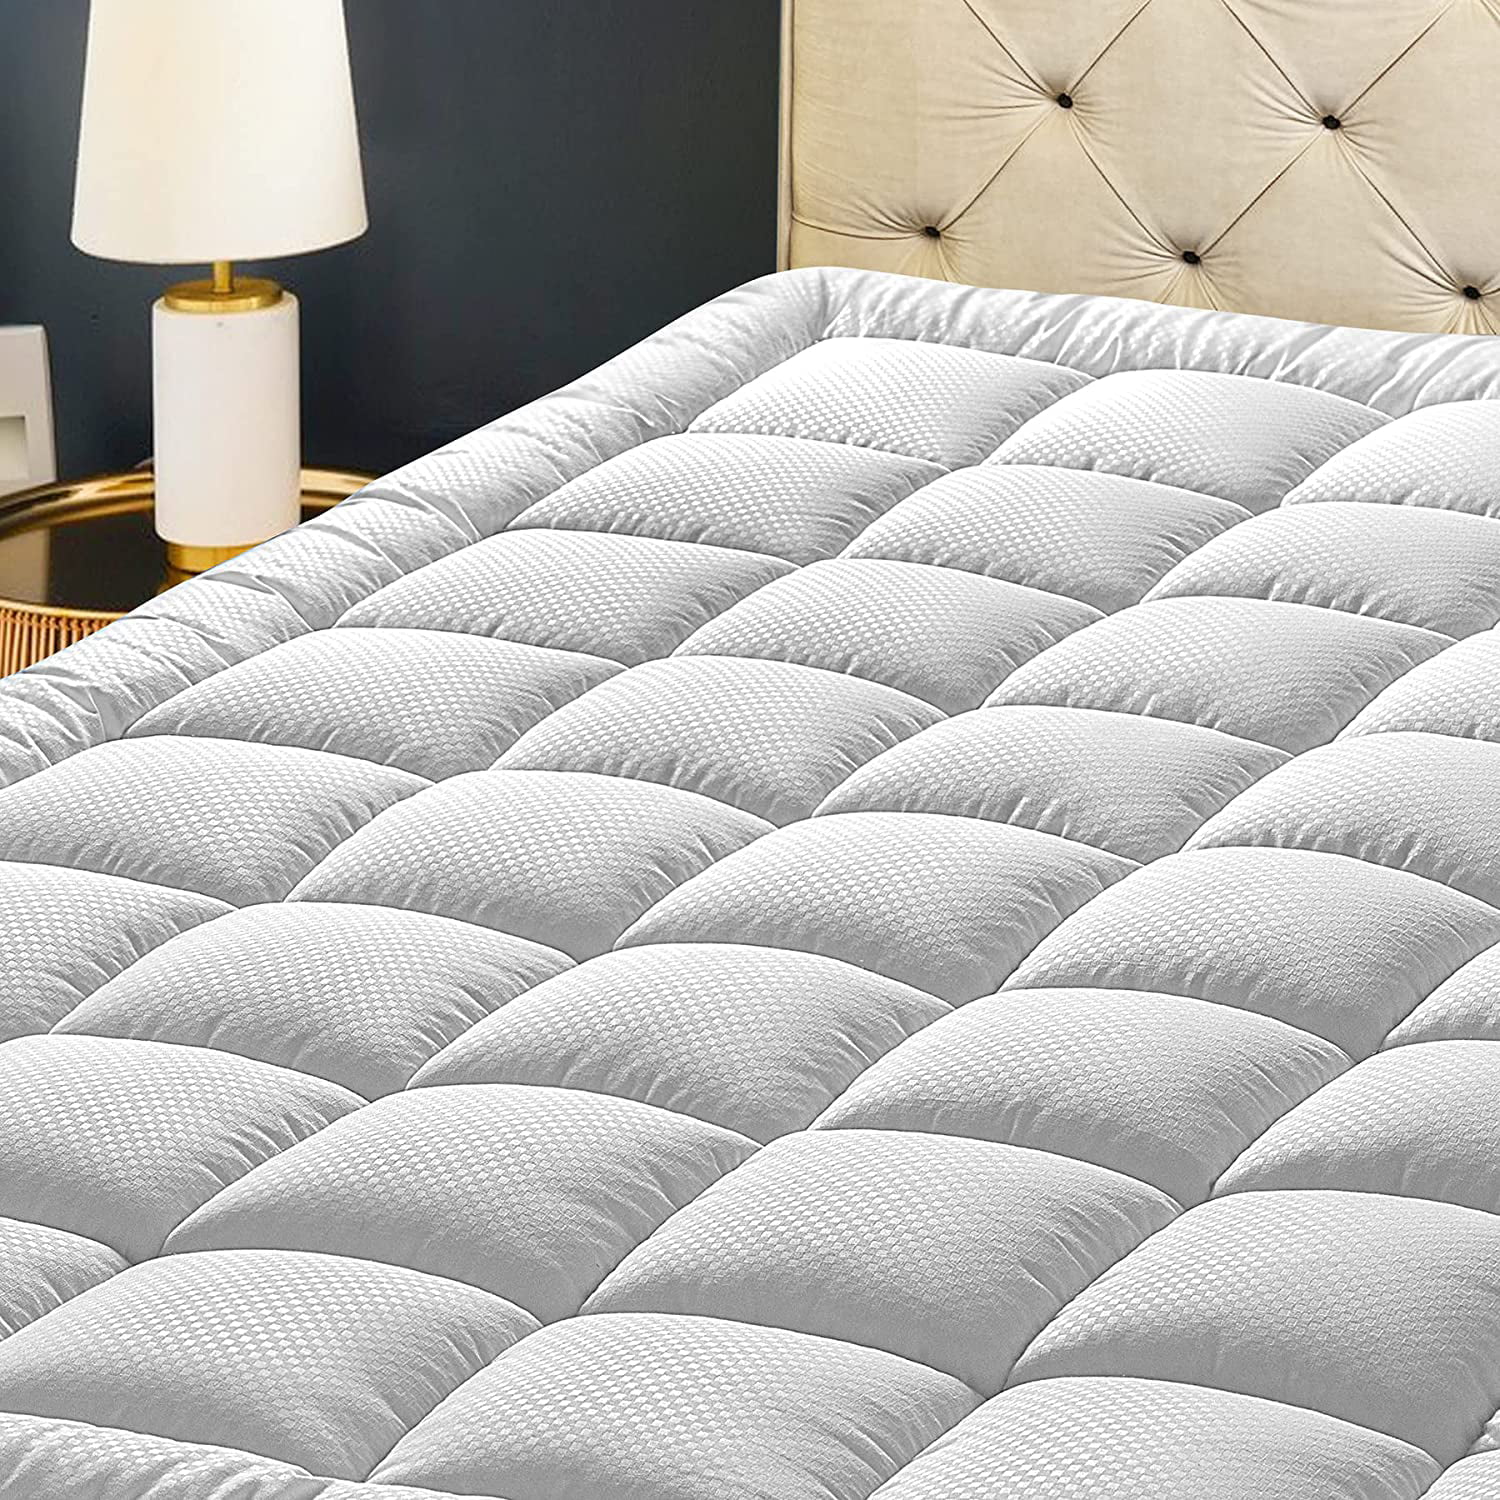 54x75Inches Breathable Down Alternative Quilted Fitted Mattress Protector Cover with 18 Deep Pocket Decroom Cooling Twin XL Size Mattress Pad 